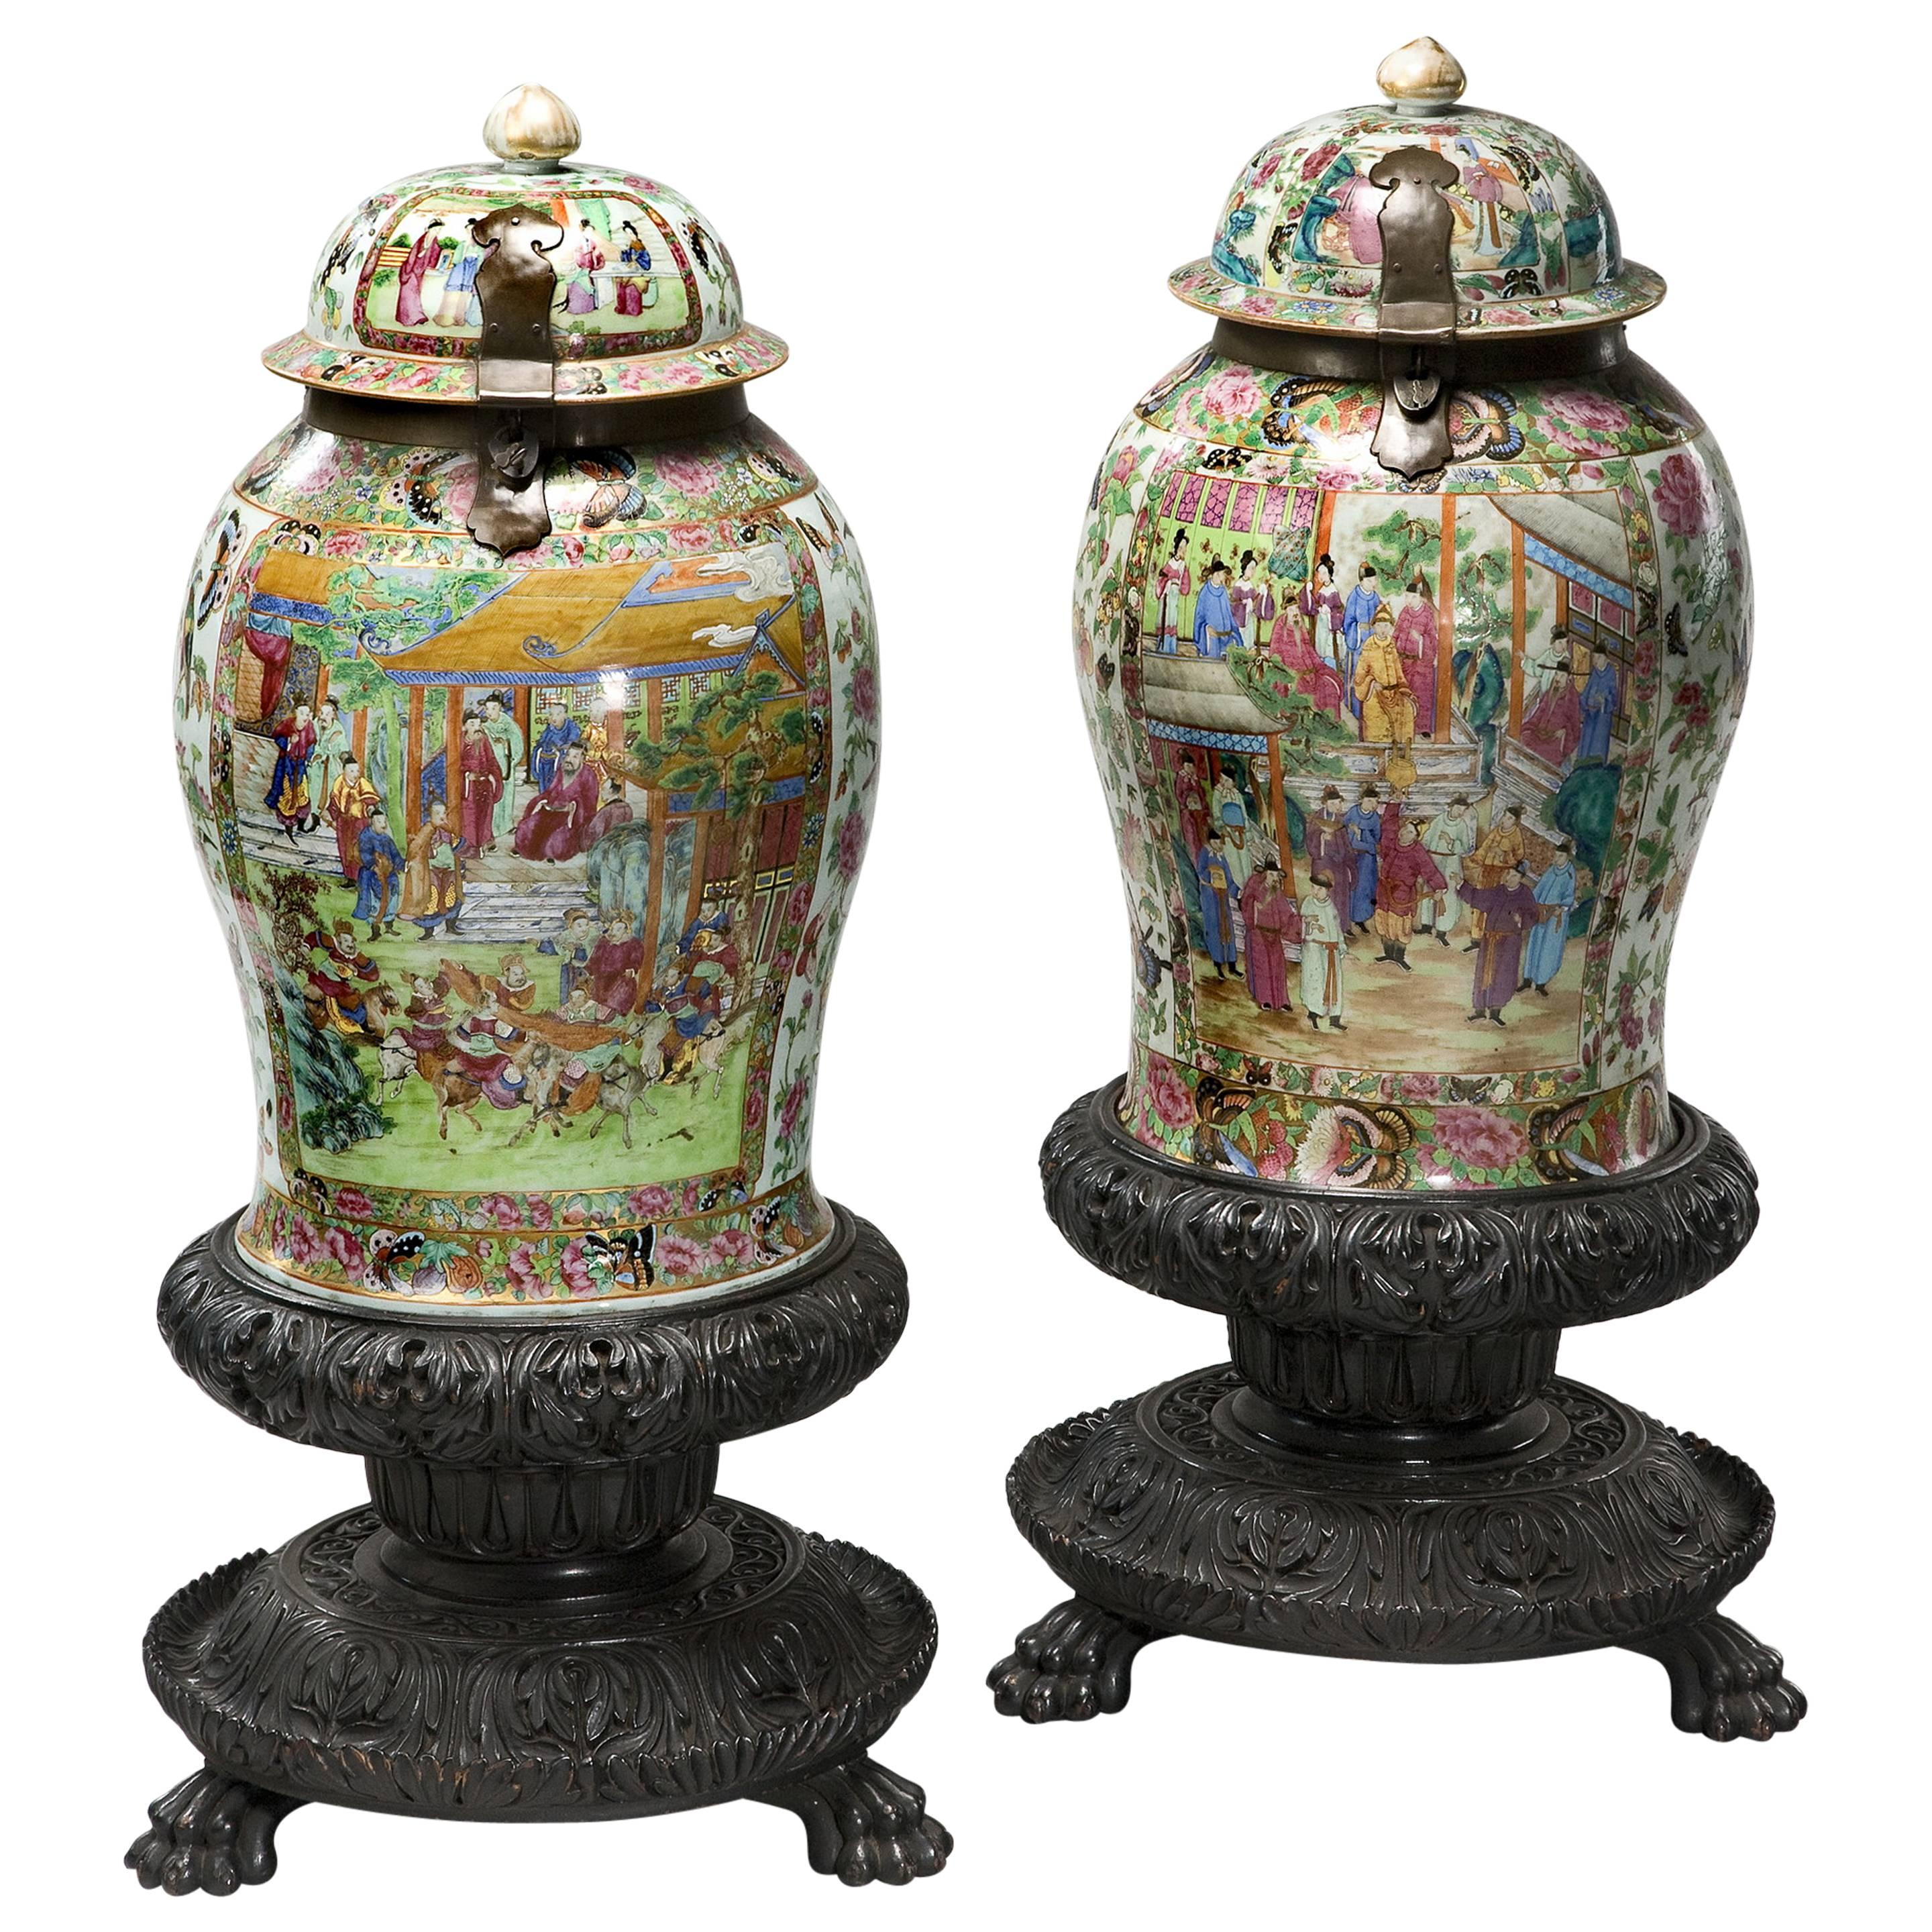 Matched Pair of Cantonese Enameled Porcelain Standing Jars For Sale